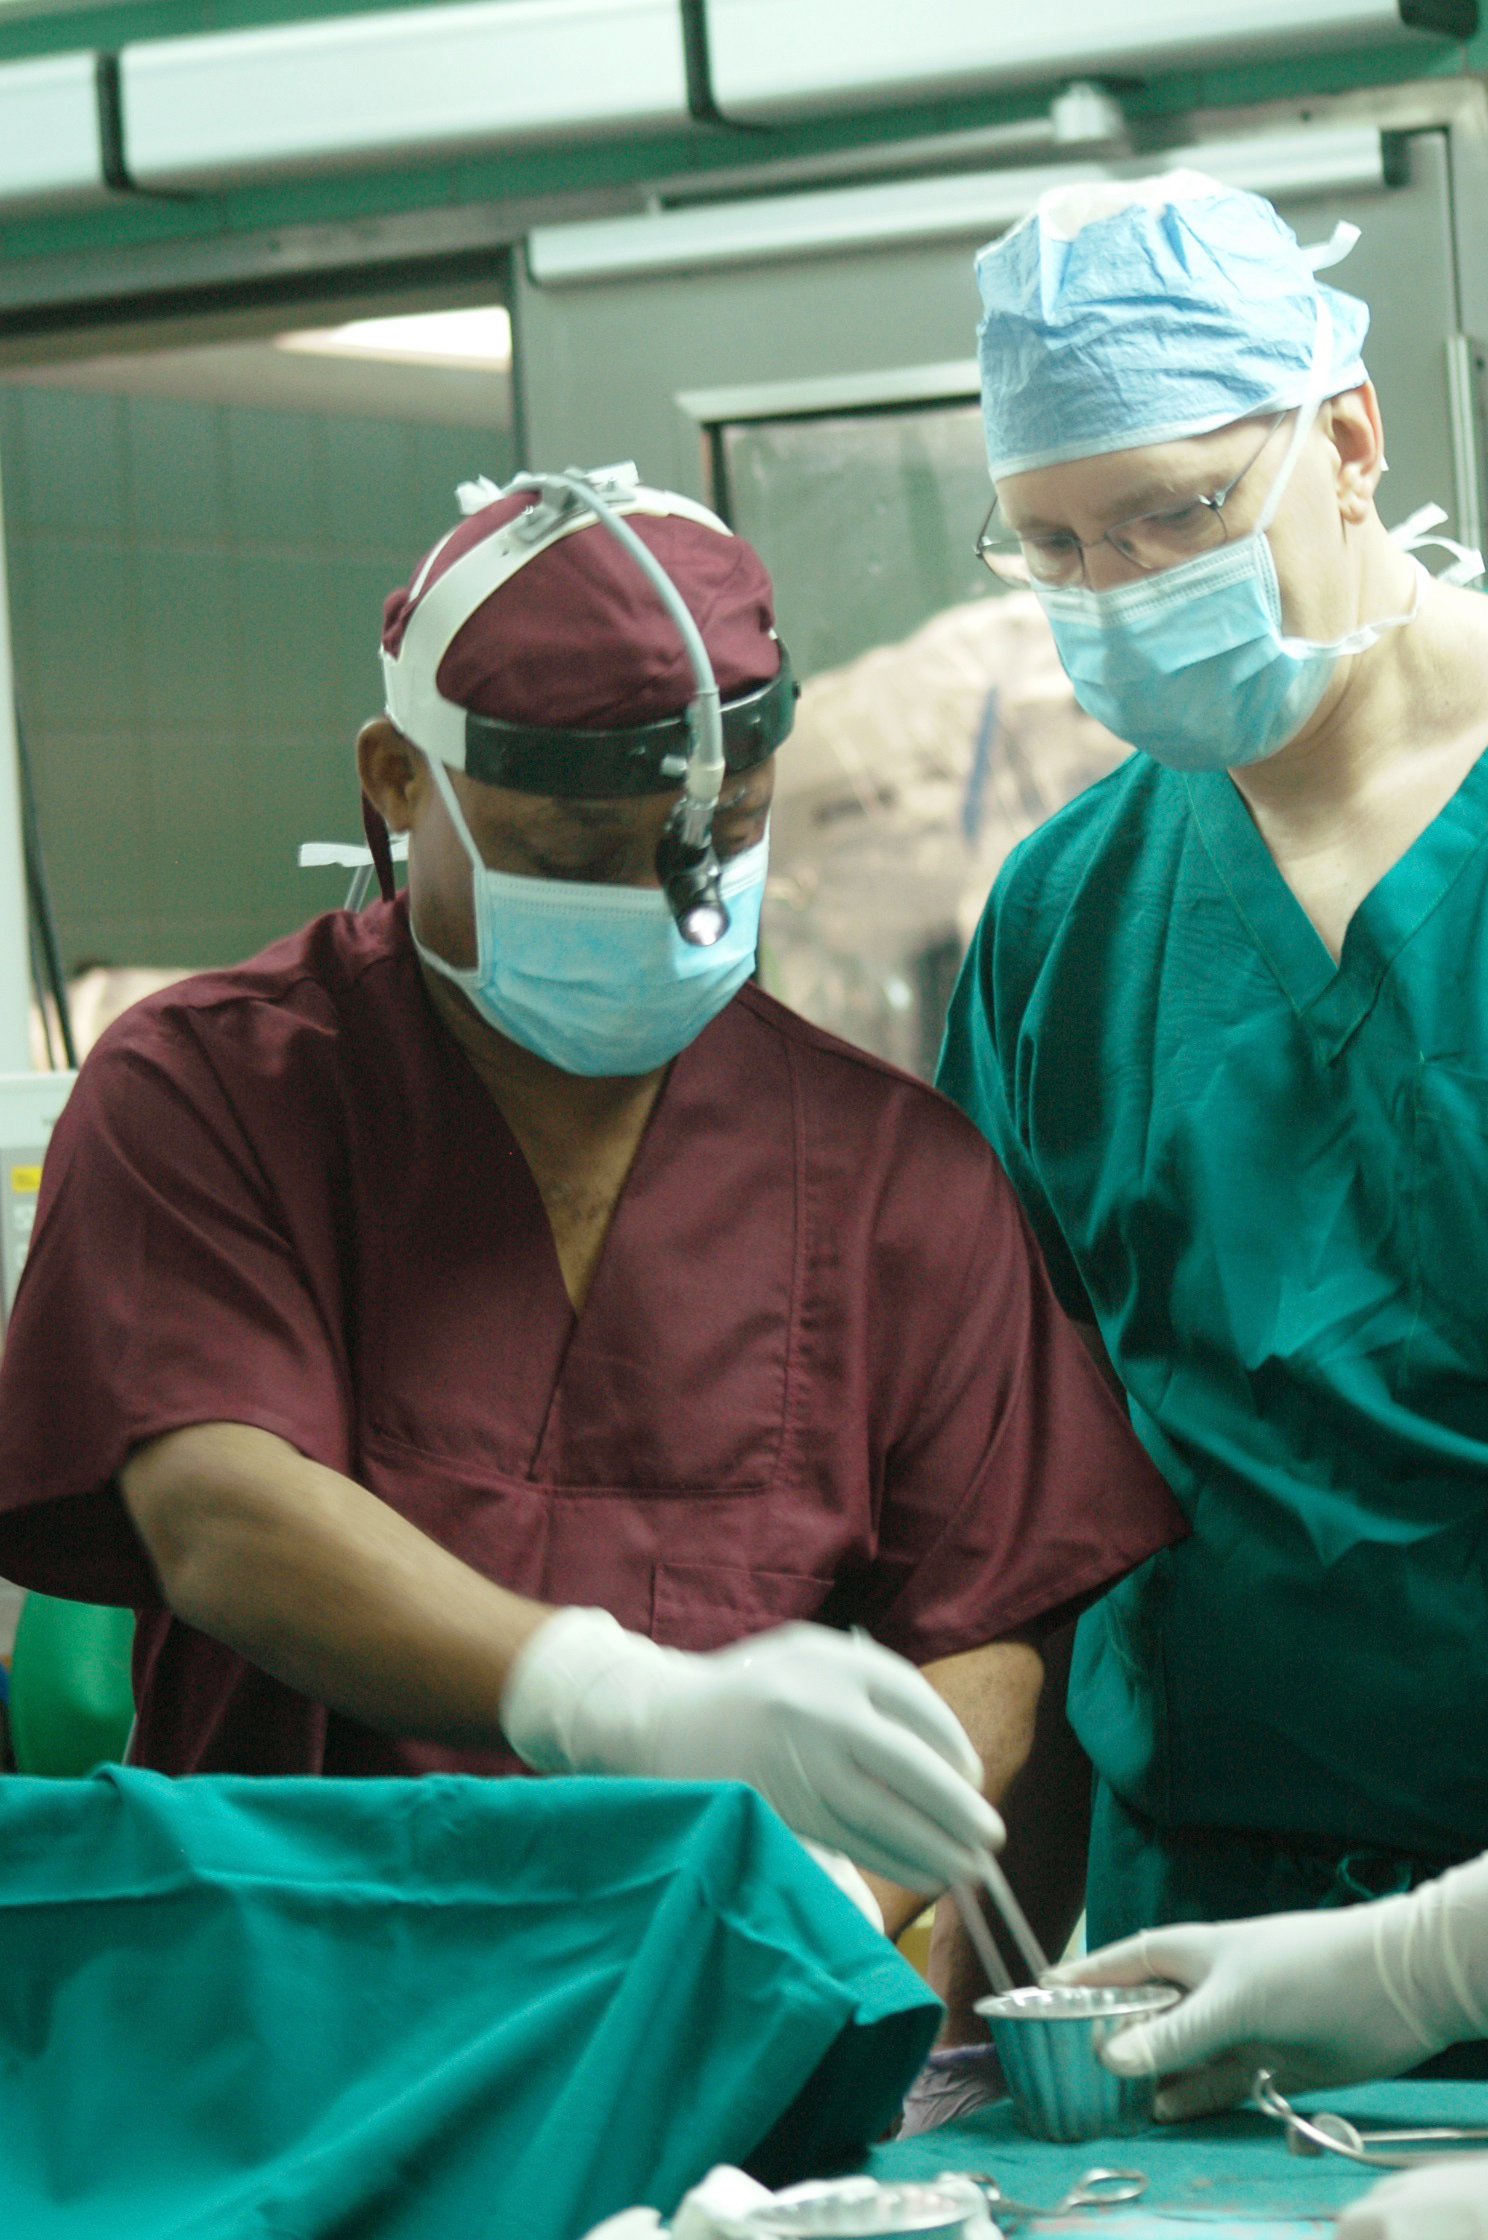 two surgeons in scrubs and maskes preparing to perform 